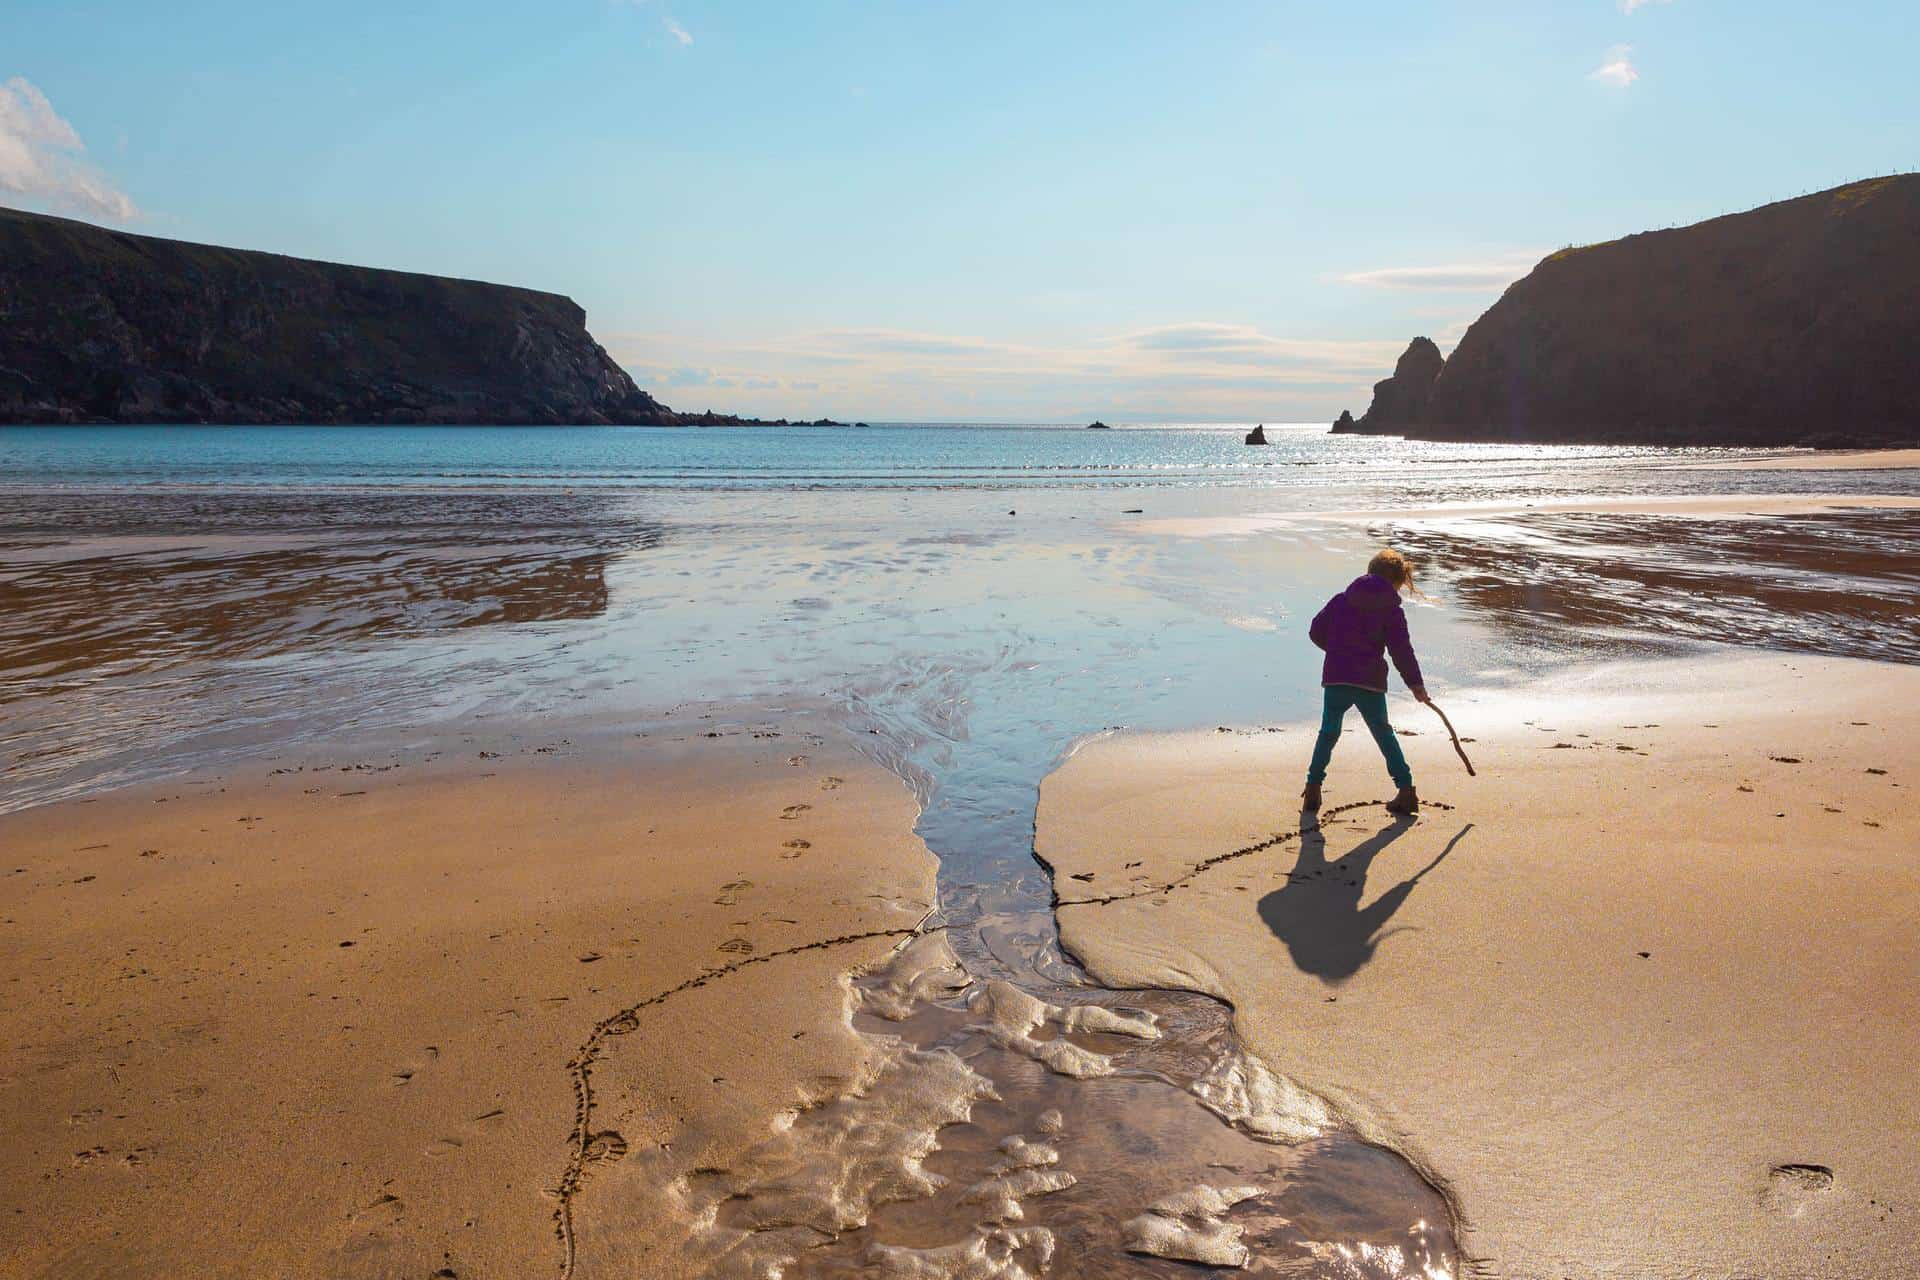 A child playing on the beach of Malin Beg, County Donegal, Ireland